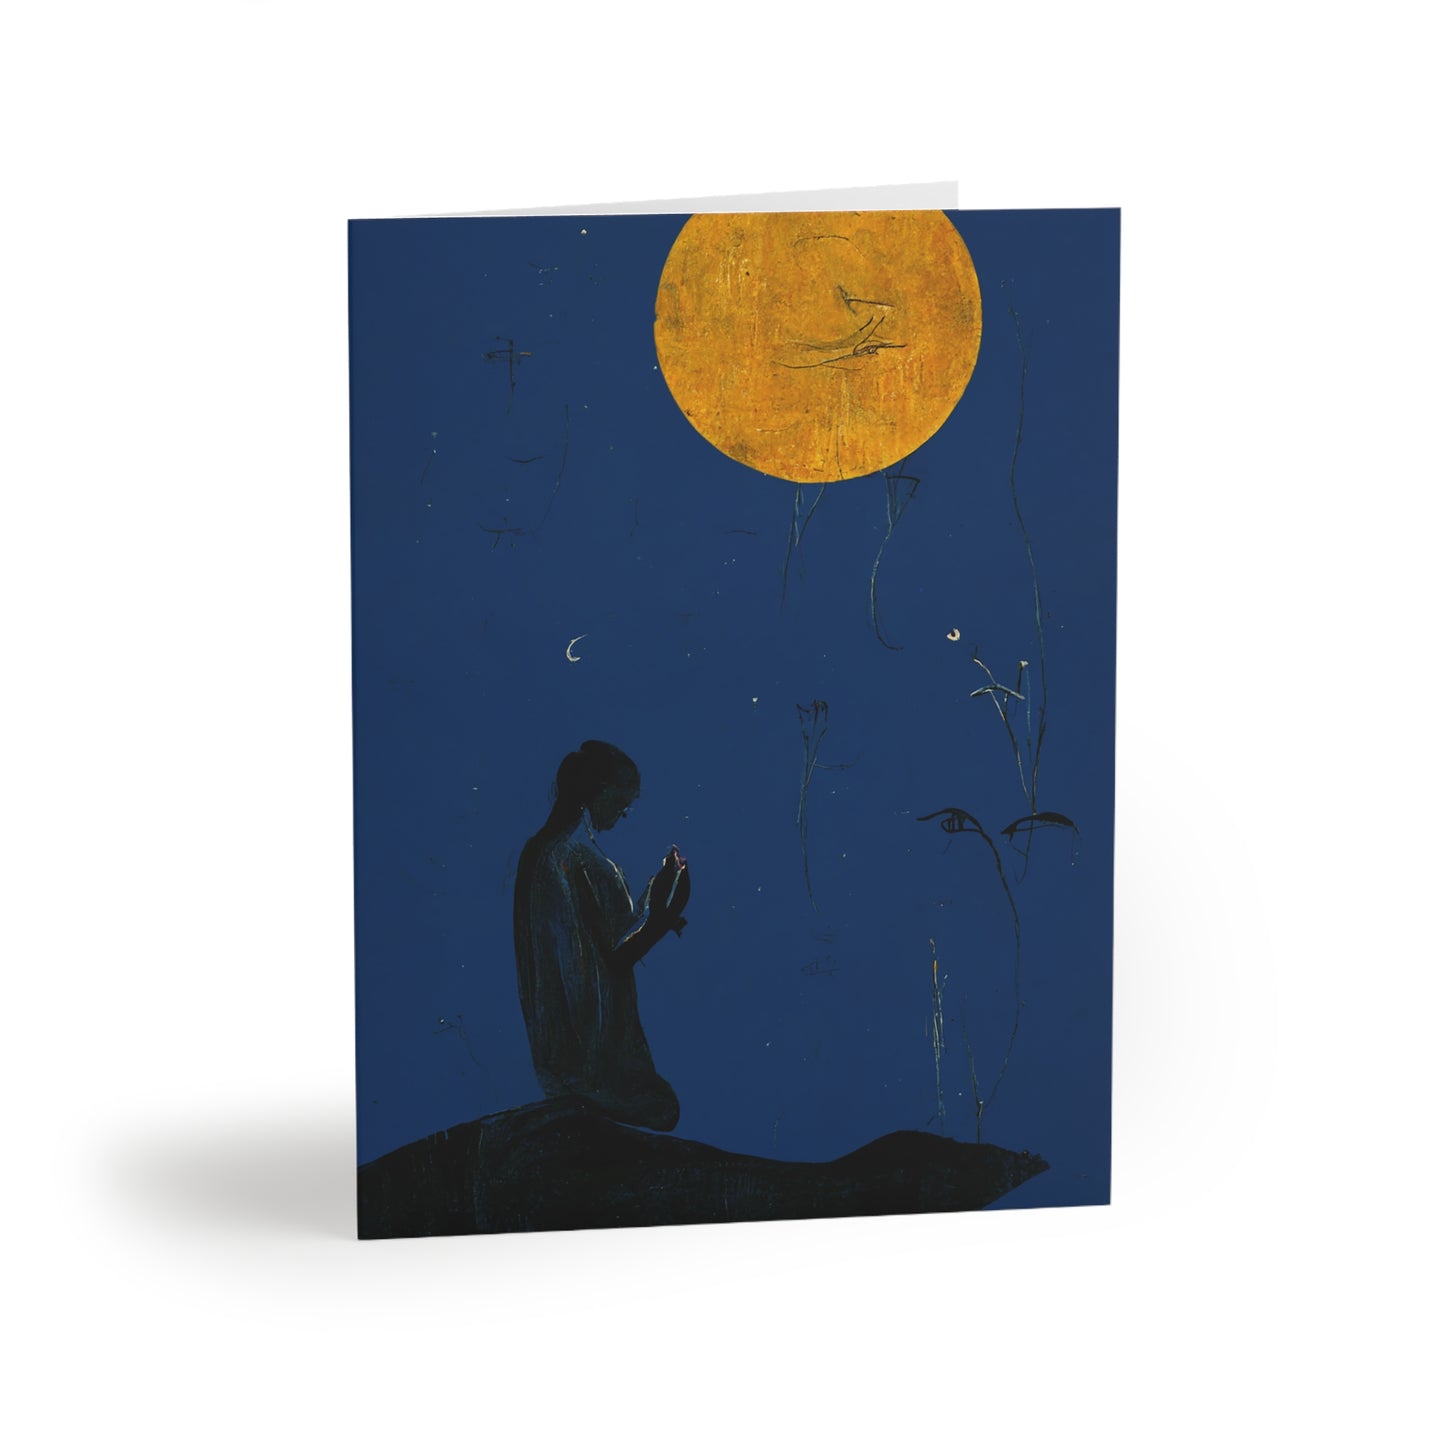 "Connect with Spirit" Greeting cards (8, 16, and 24 pcs)